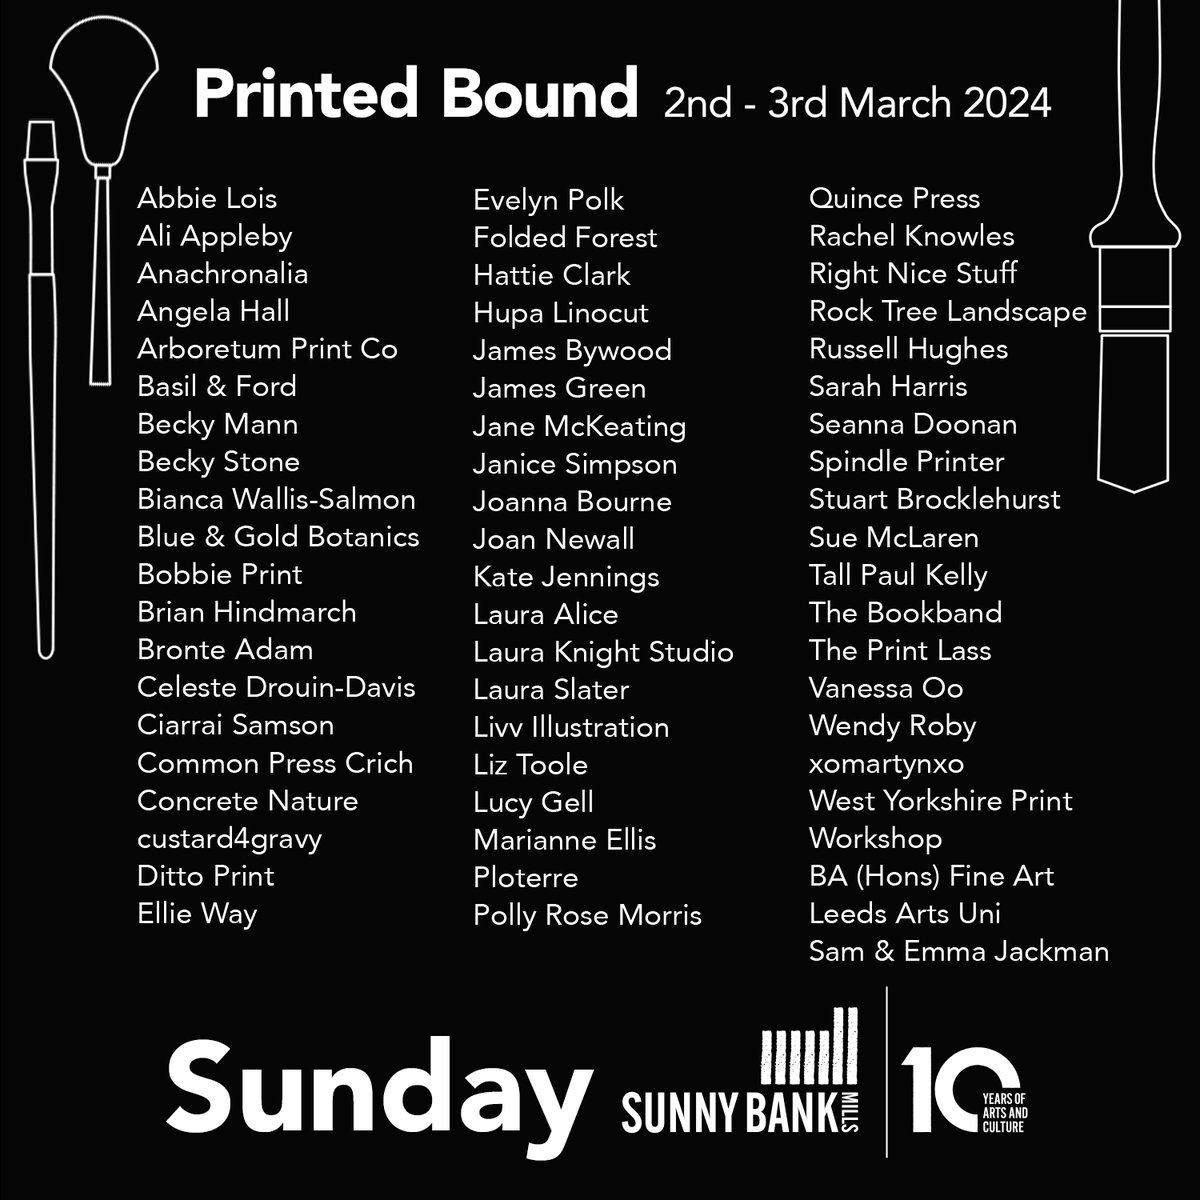 Printed Bound starts 2 WEEKS TODAY. Here is a full list of stallholders for Leeds' biggest print fair, with over 50 artists exhibiting per day! Visit our website to find out what's happening across the weekend > sunnybankmills.co.uk/arts/gallery/p…

#Leeds #PrintFair #DaysOutInLeeds